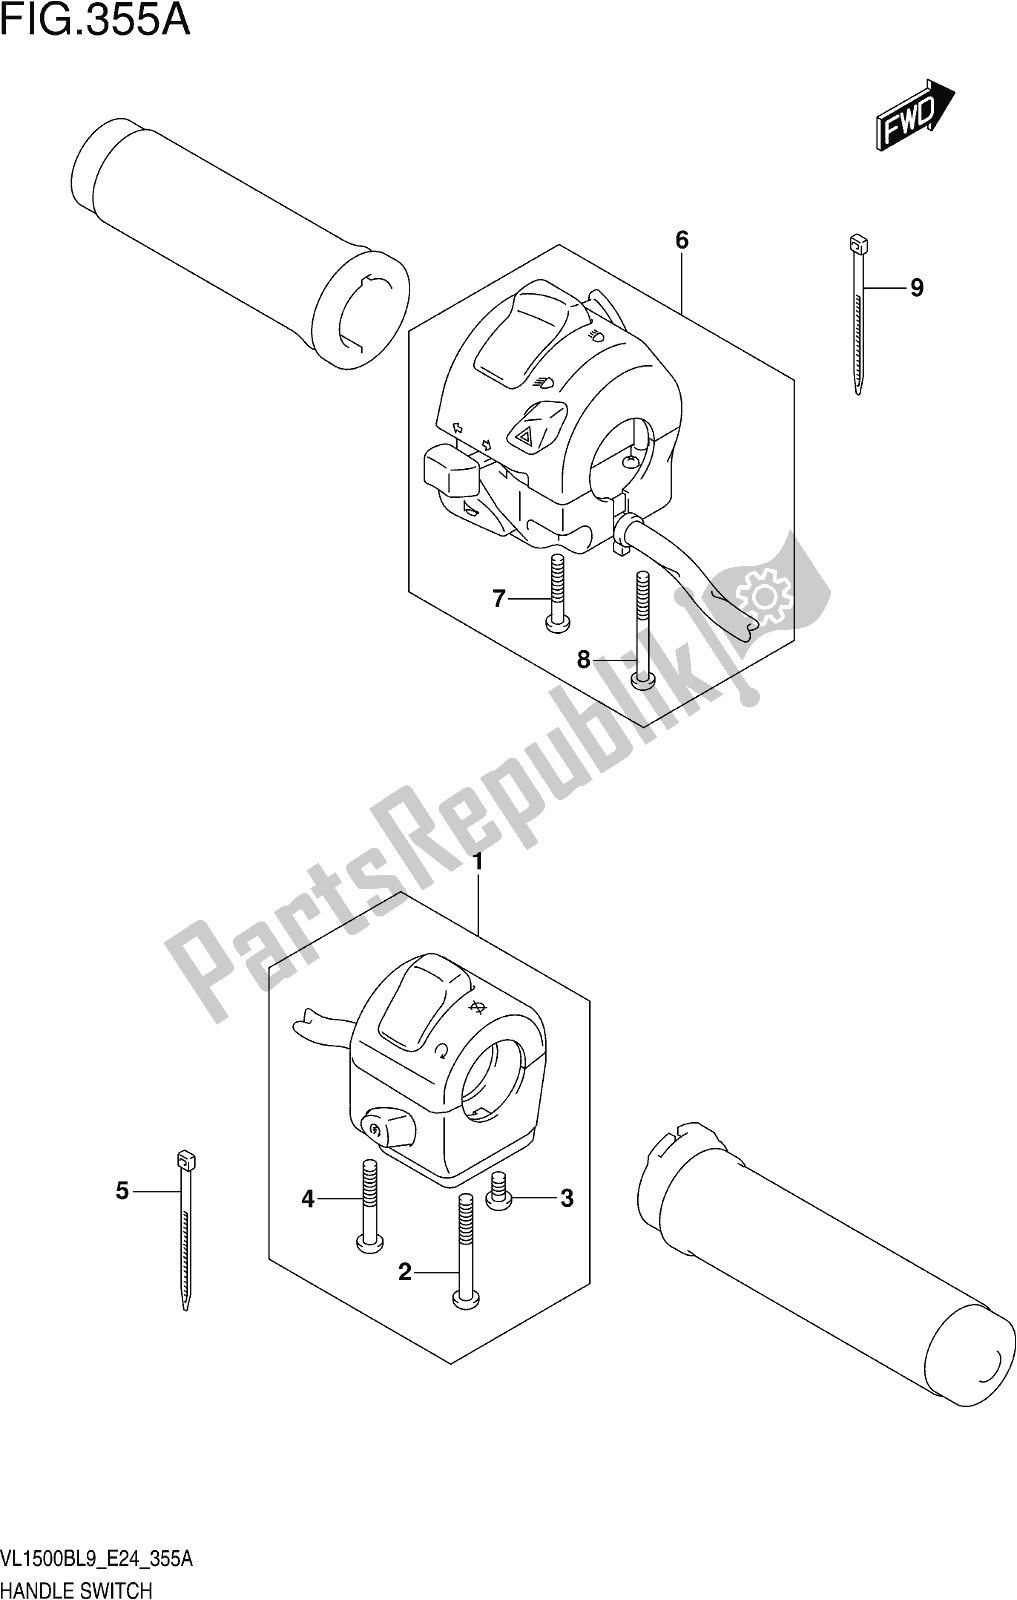 All parts for the Fig. 355a Handle Switch of the Suzuki VL 1500B 2019